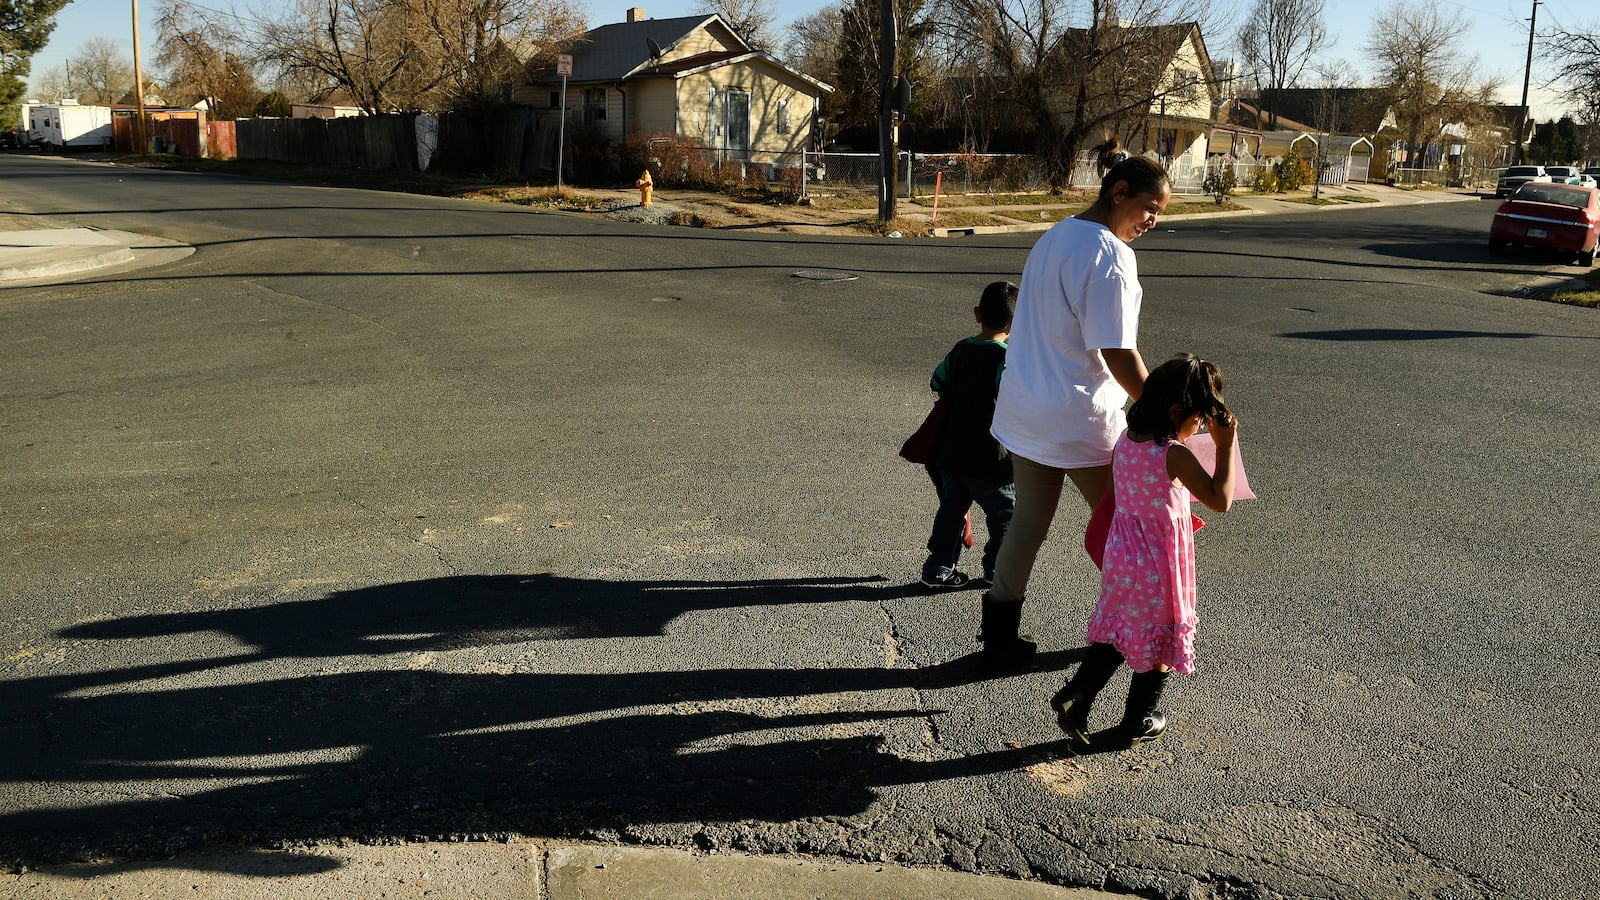 Olga Montellano walks with her daughter Milagros Santos, 3, right, and her neighor’s son, Juan Pablo Ordoñez, 3, after preschool in their neighborhood.